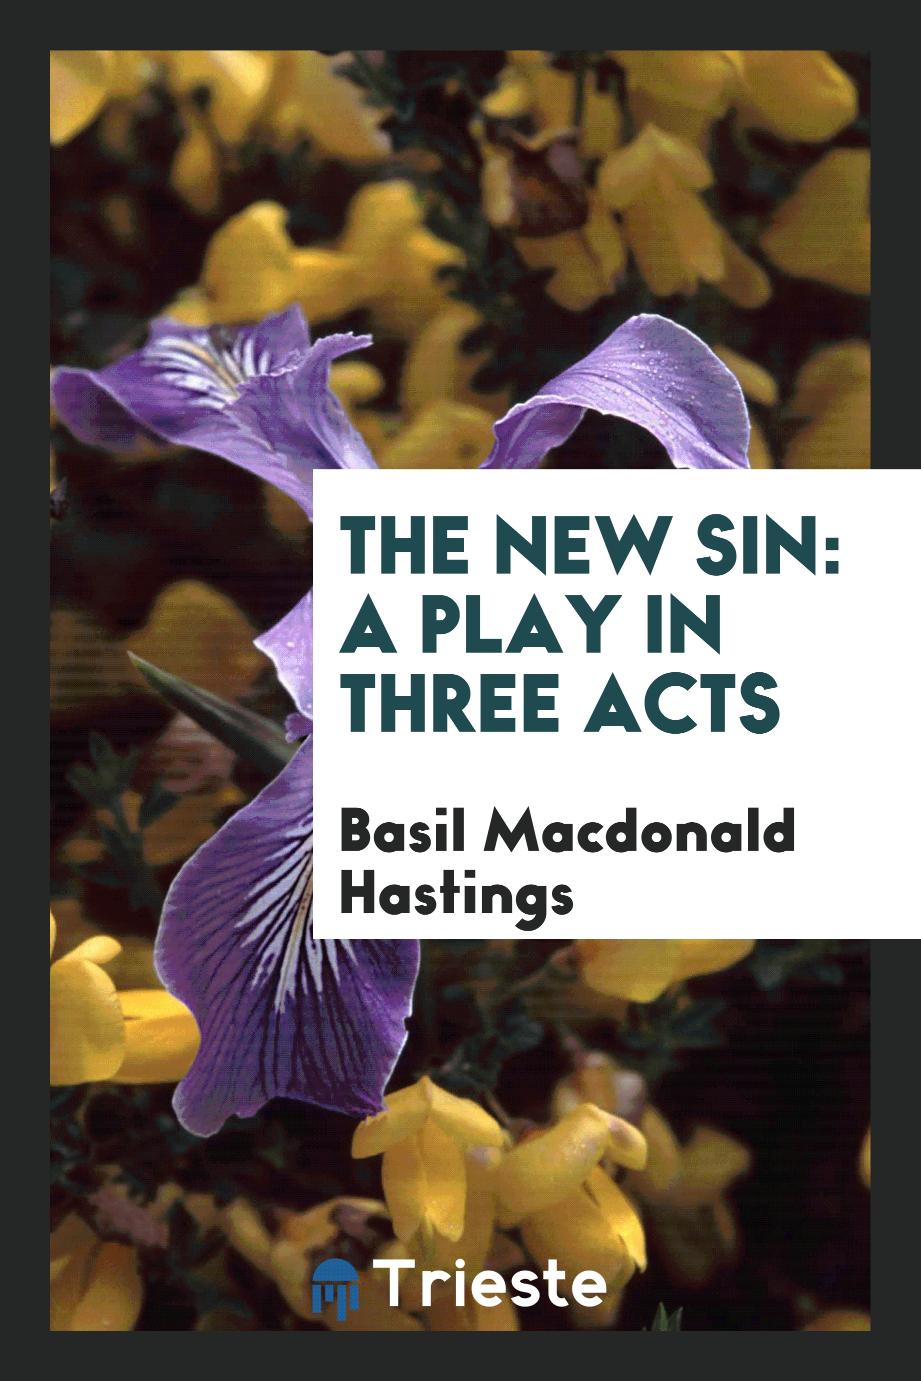 Basil Macdonald Hastings - The new sin: a play in three acts